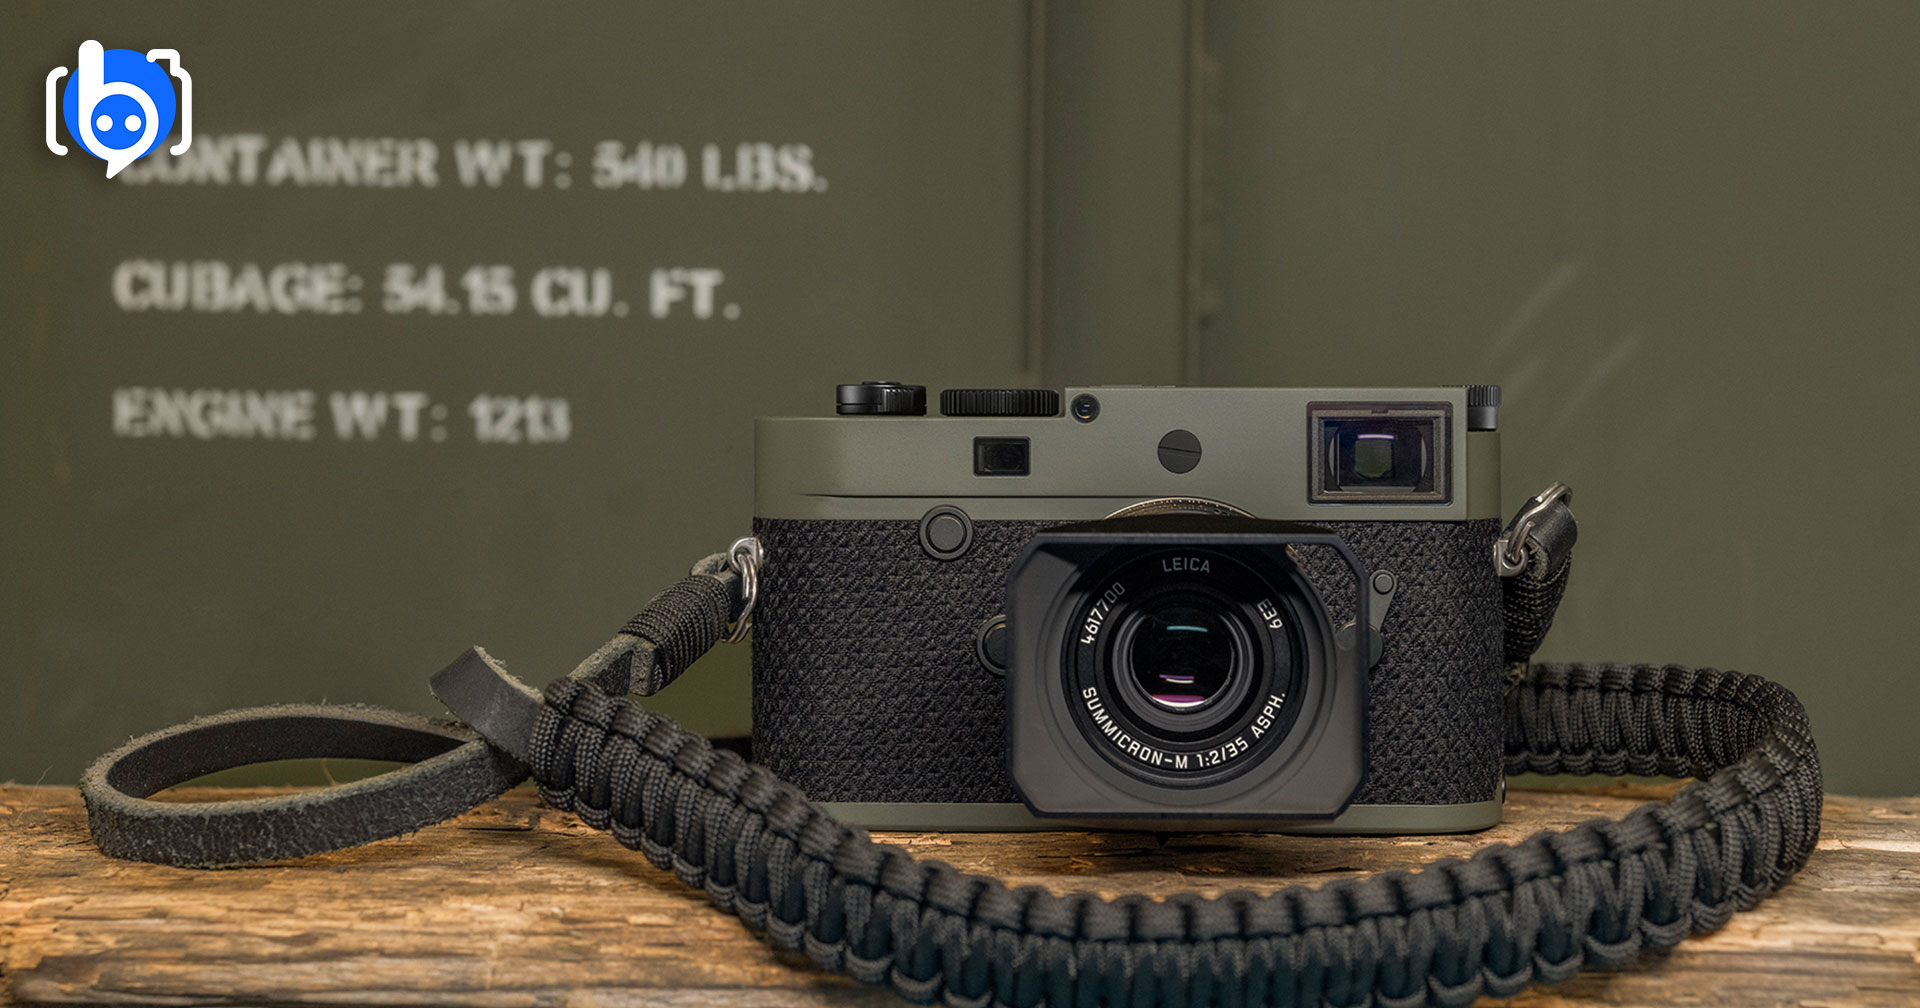 Leica M10-P "Reporter" limited edition